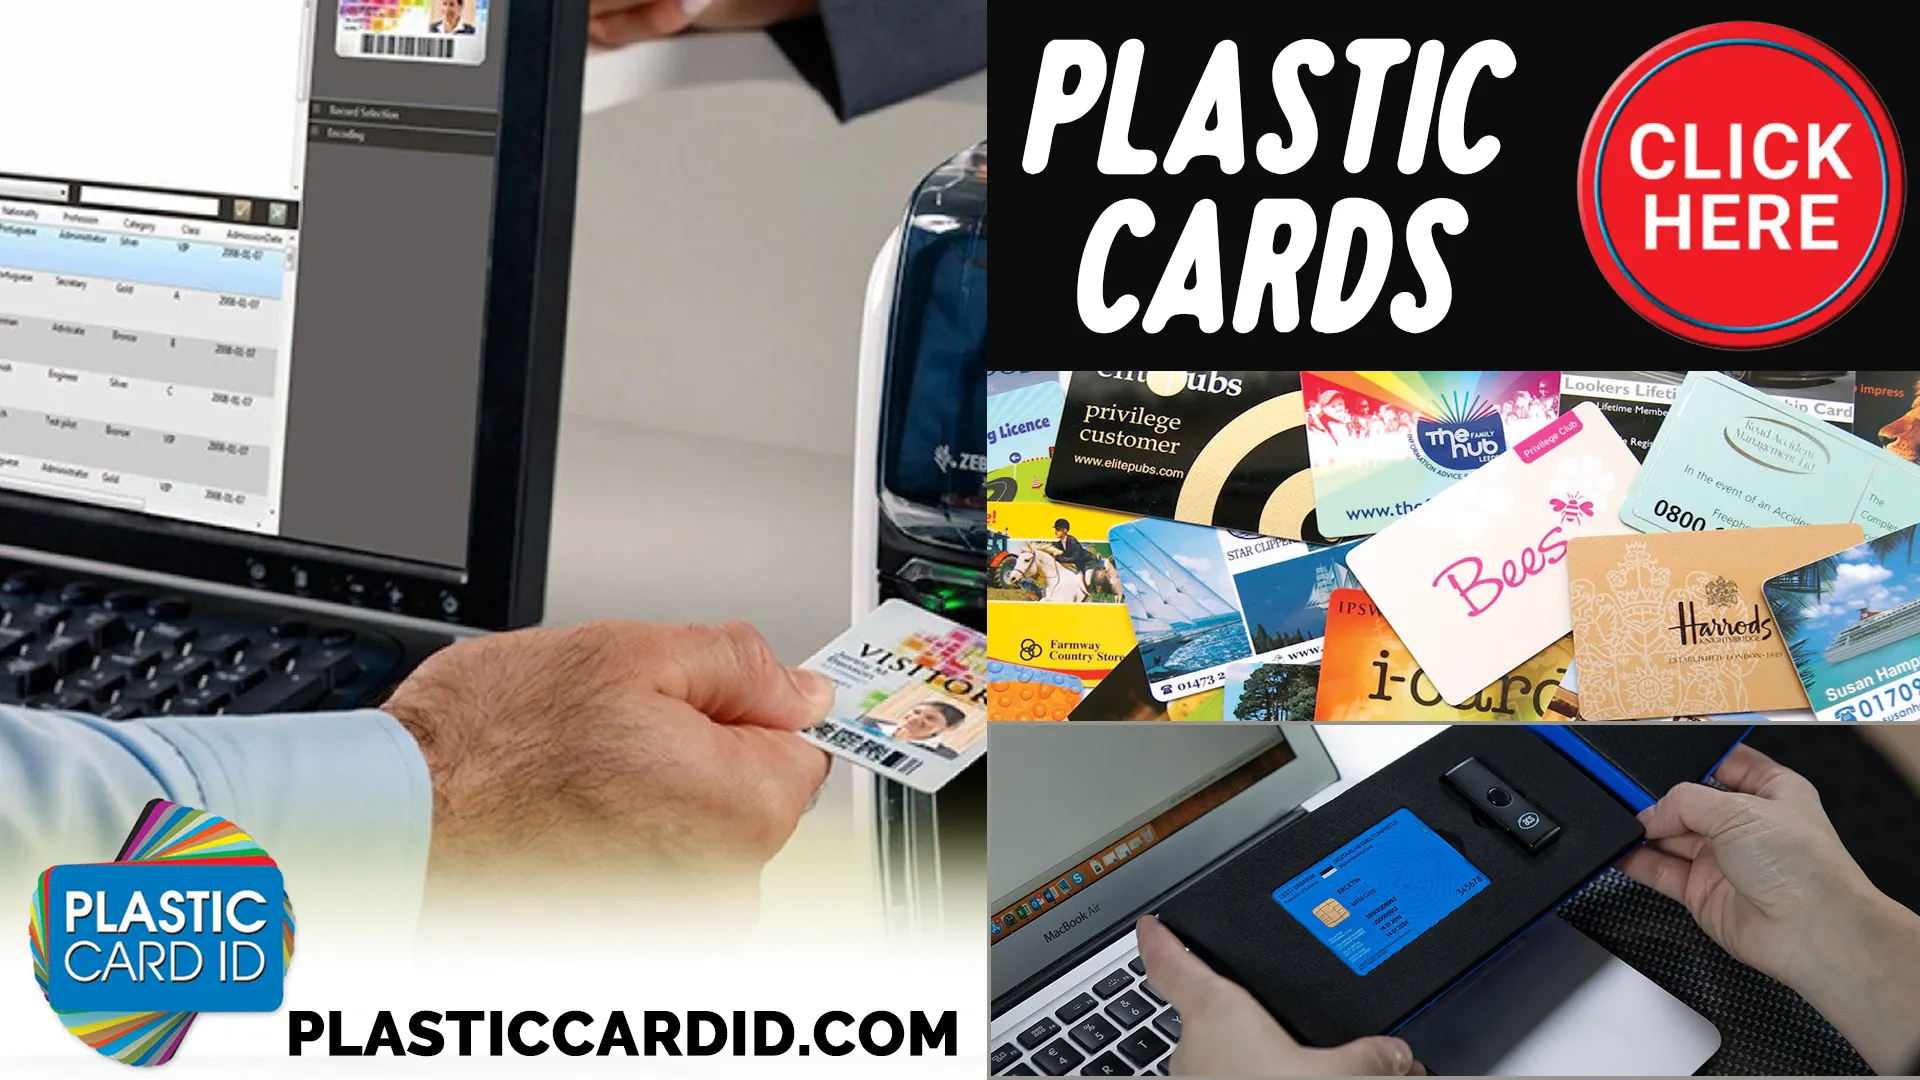 Tailoring Solutions for Every Client: Our Custom Card Printing Services